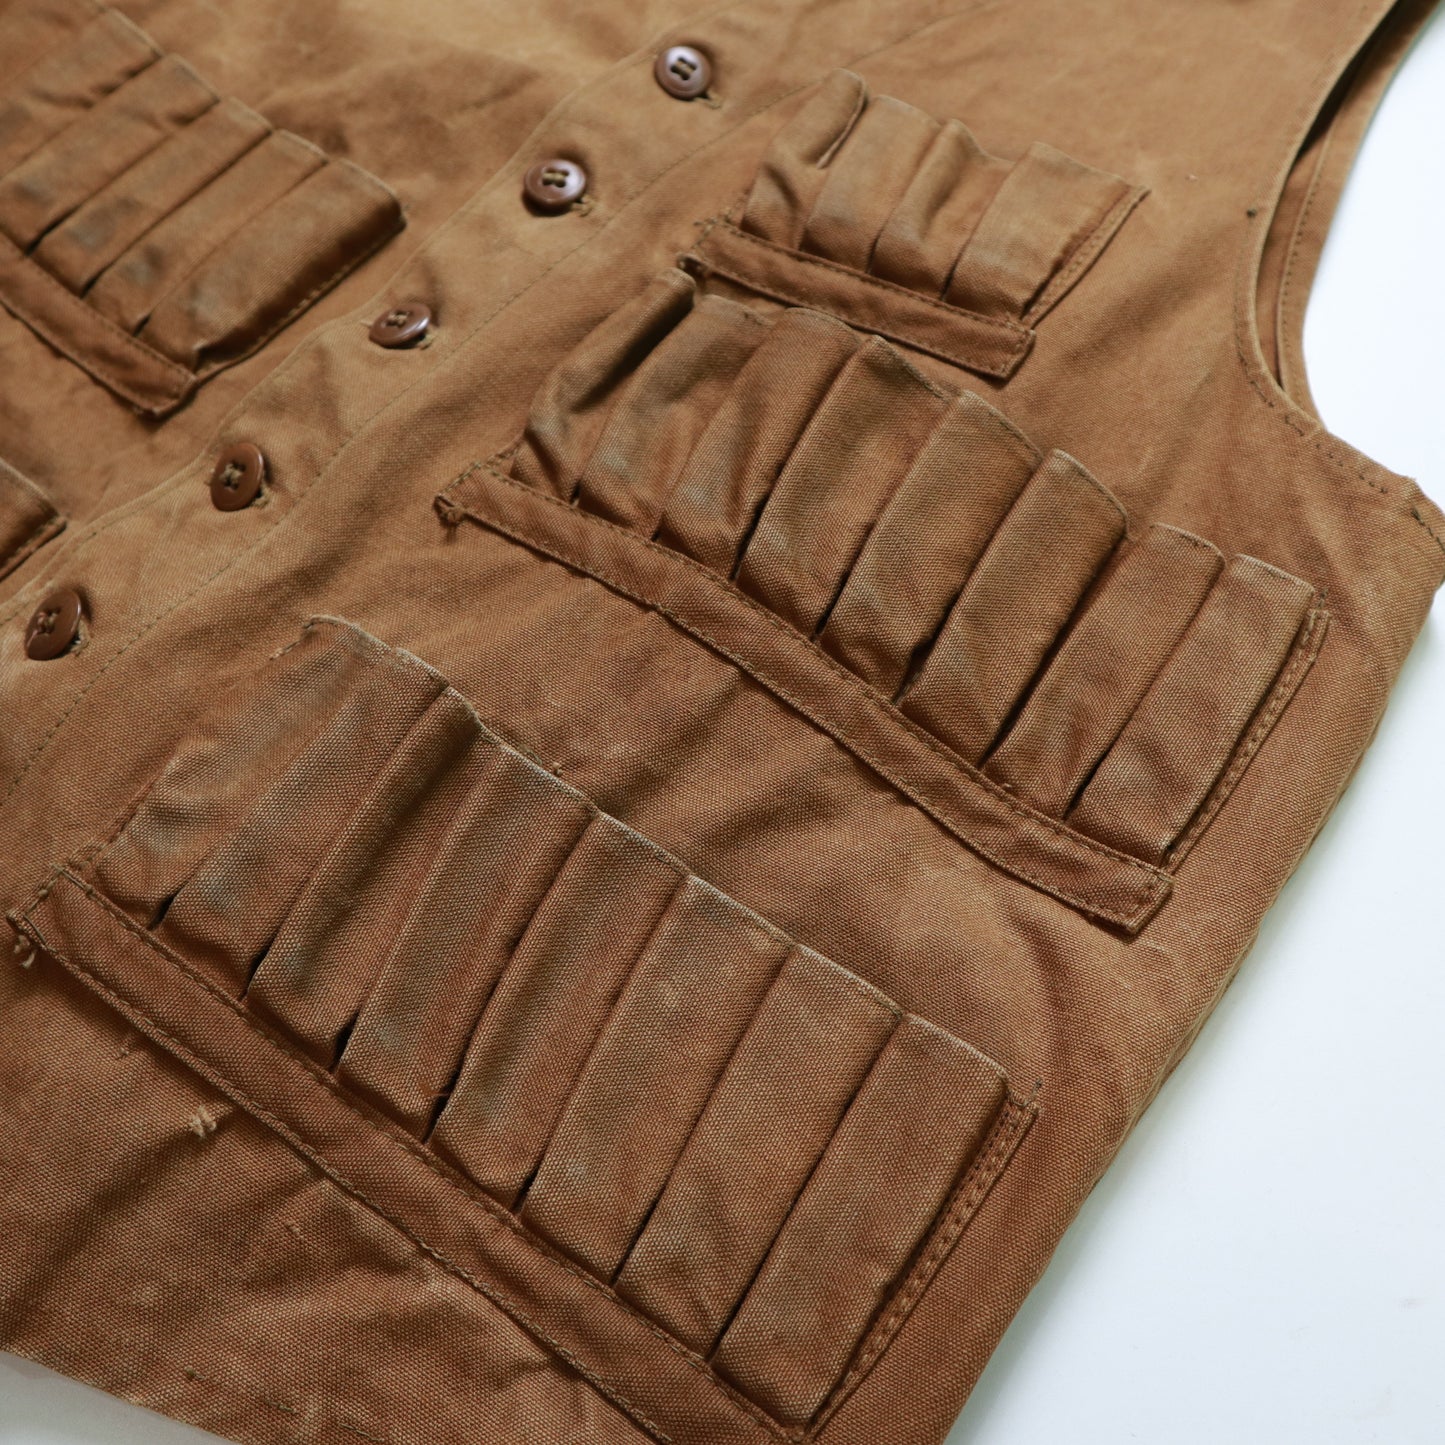 1920s The L.M.Weed Co.Buckle Back Hunting vest 狩獵背心